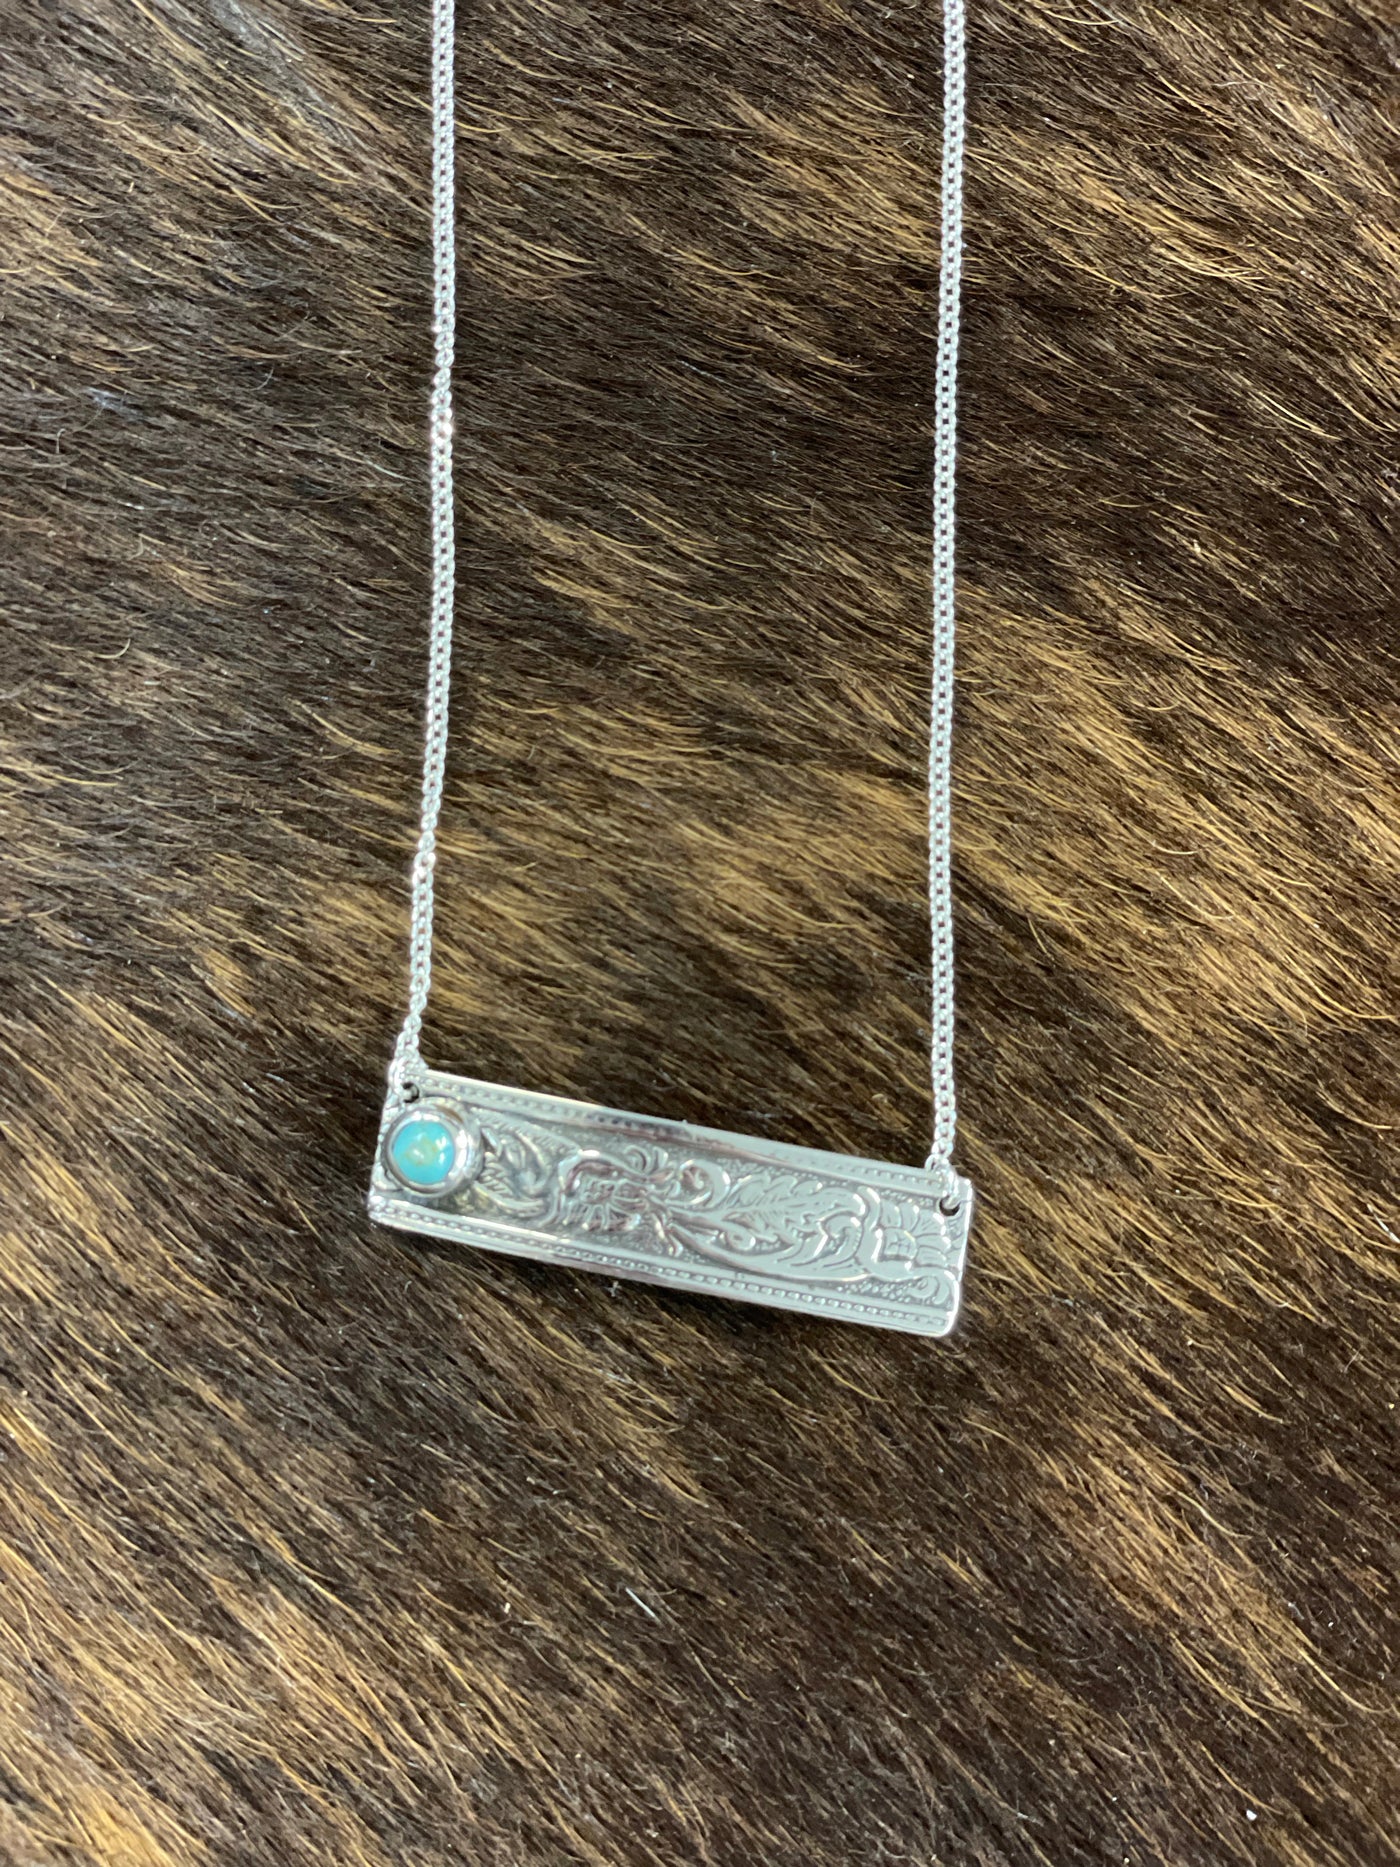 The Dodge City Silver Necklace